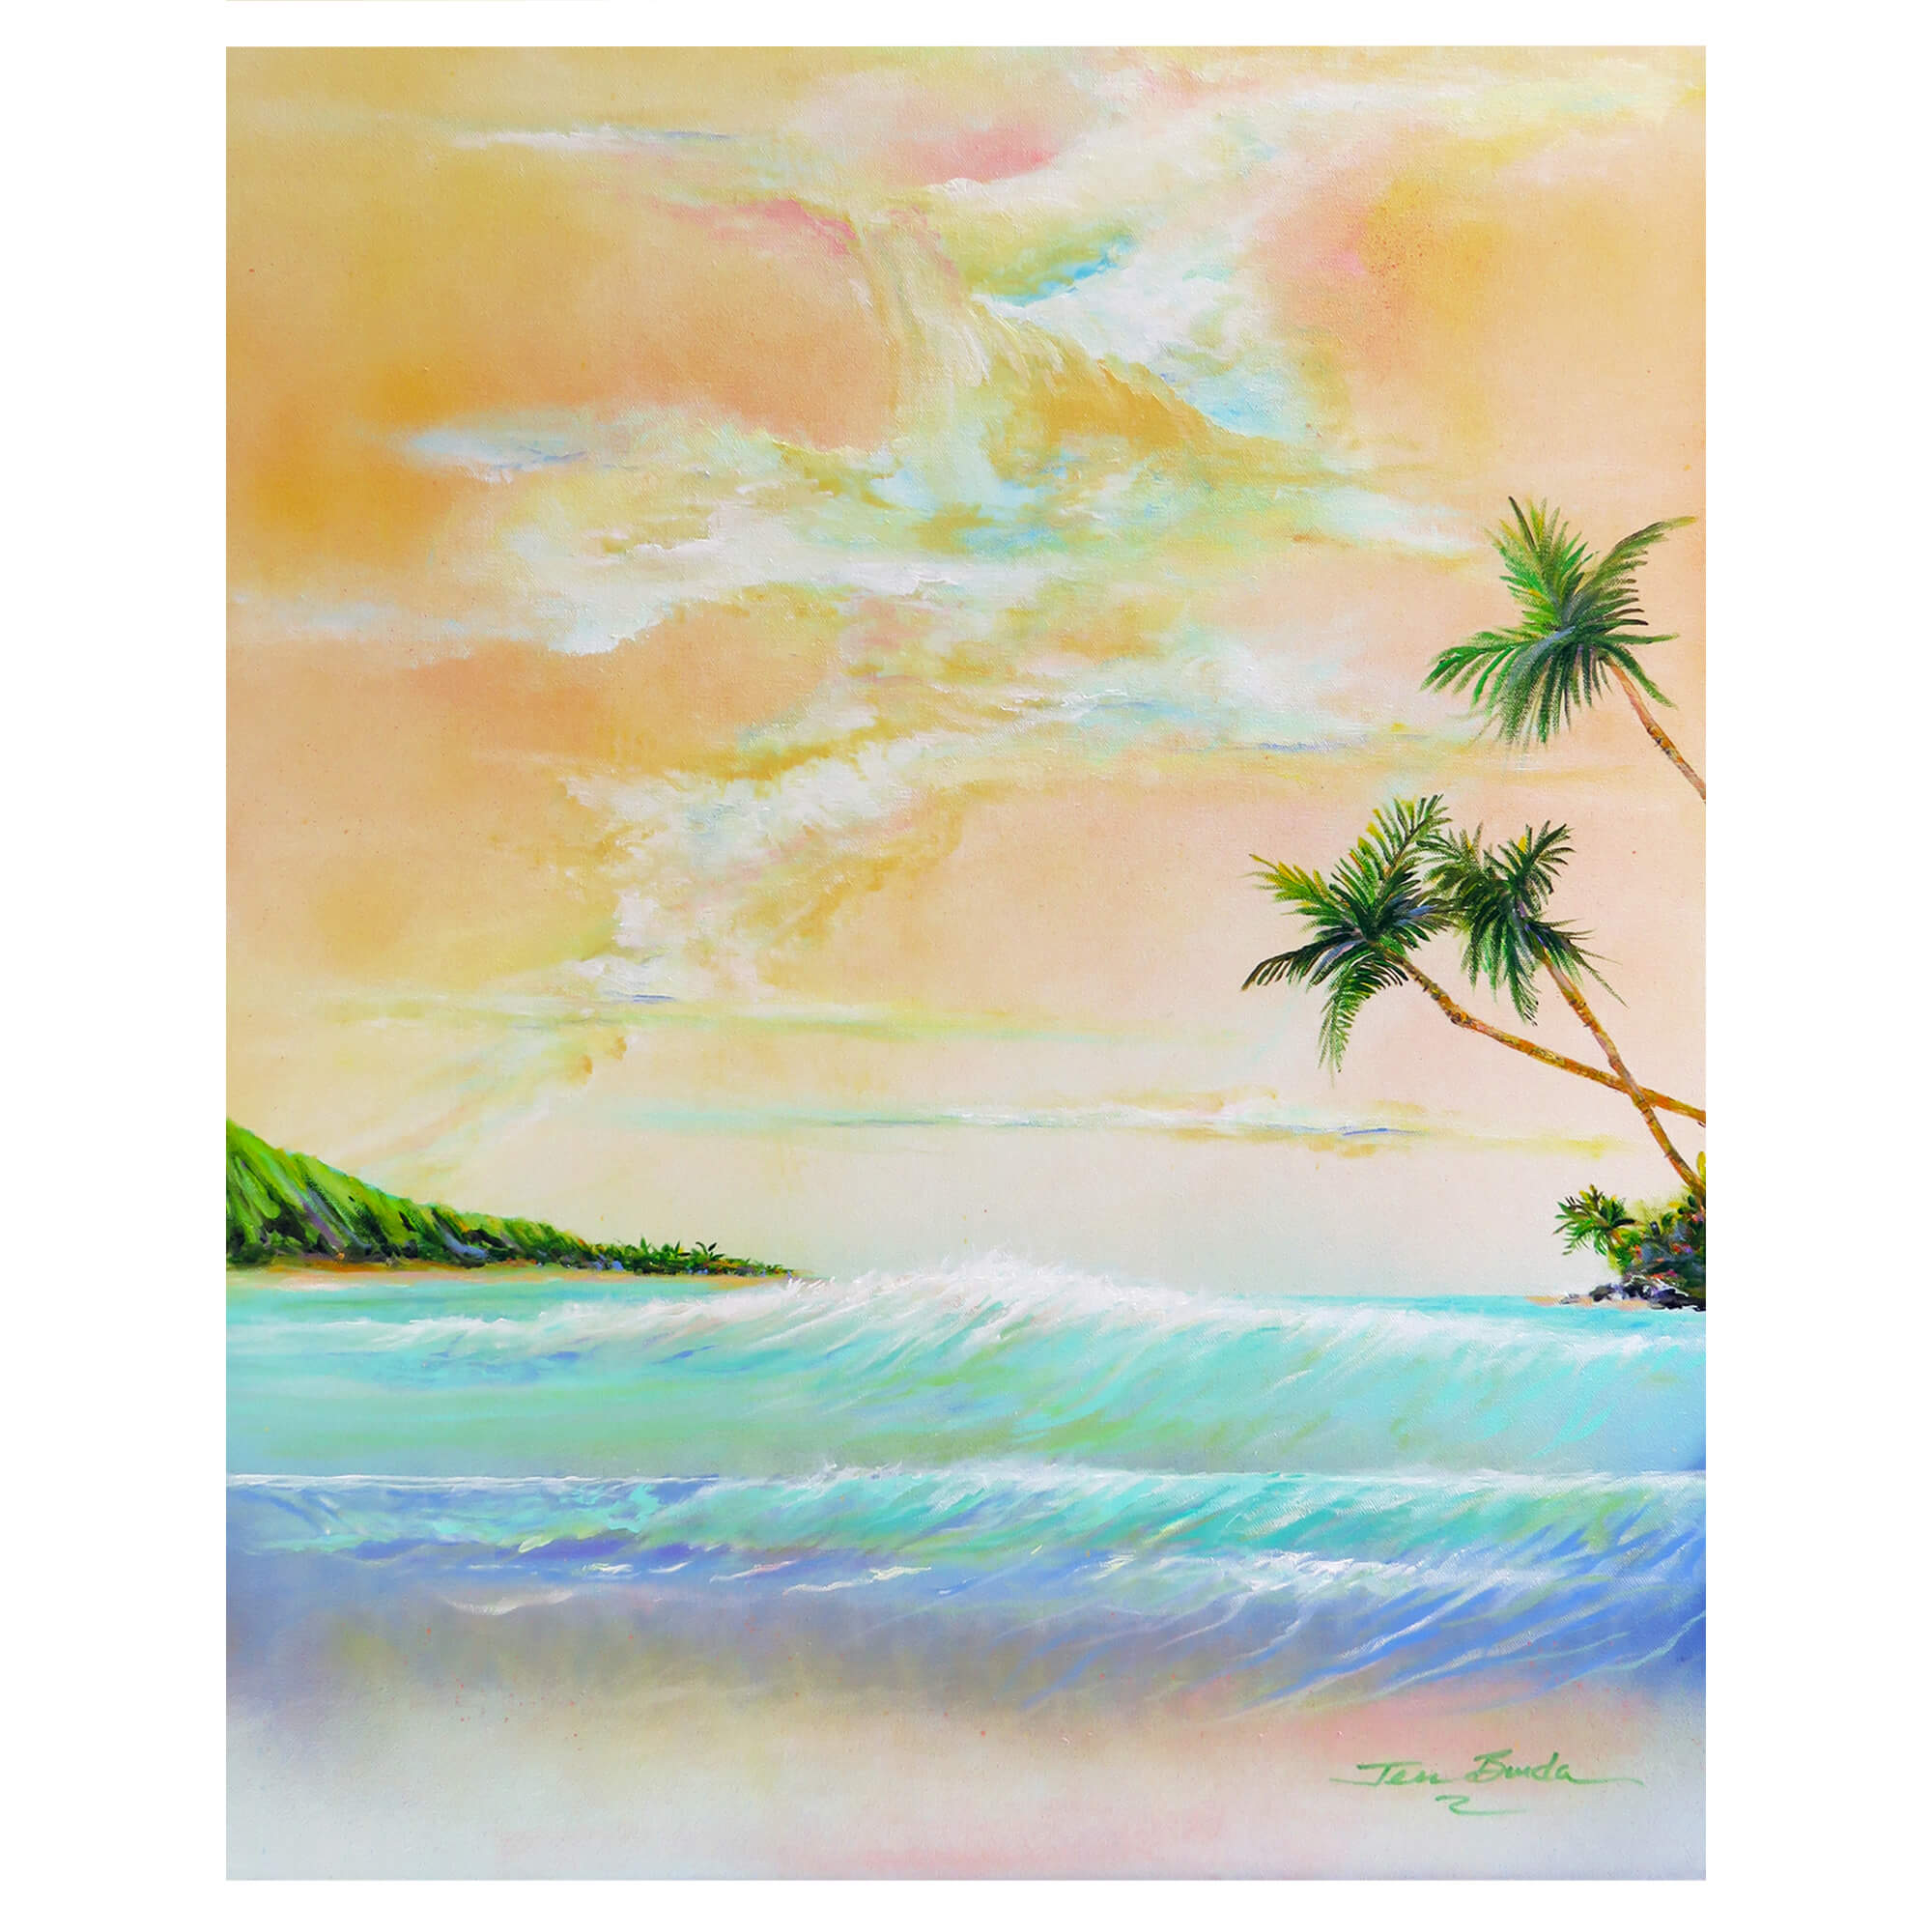 A vibrant colored seascape with coconut trees by Hawaii artist Jess Burda